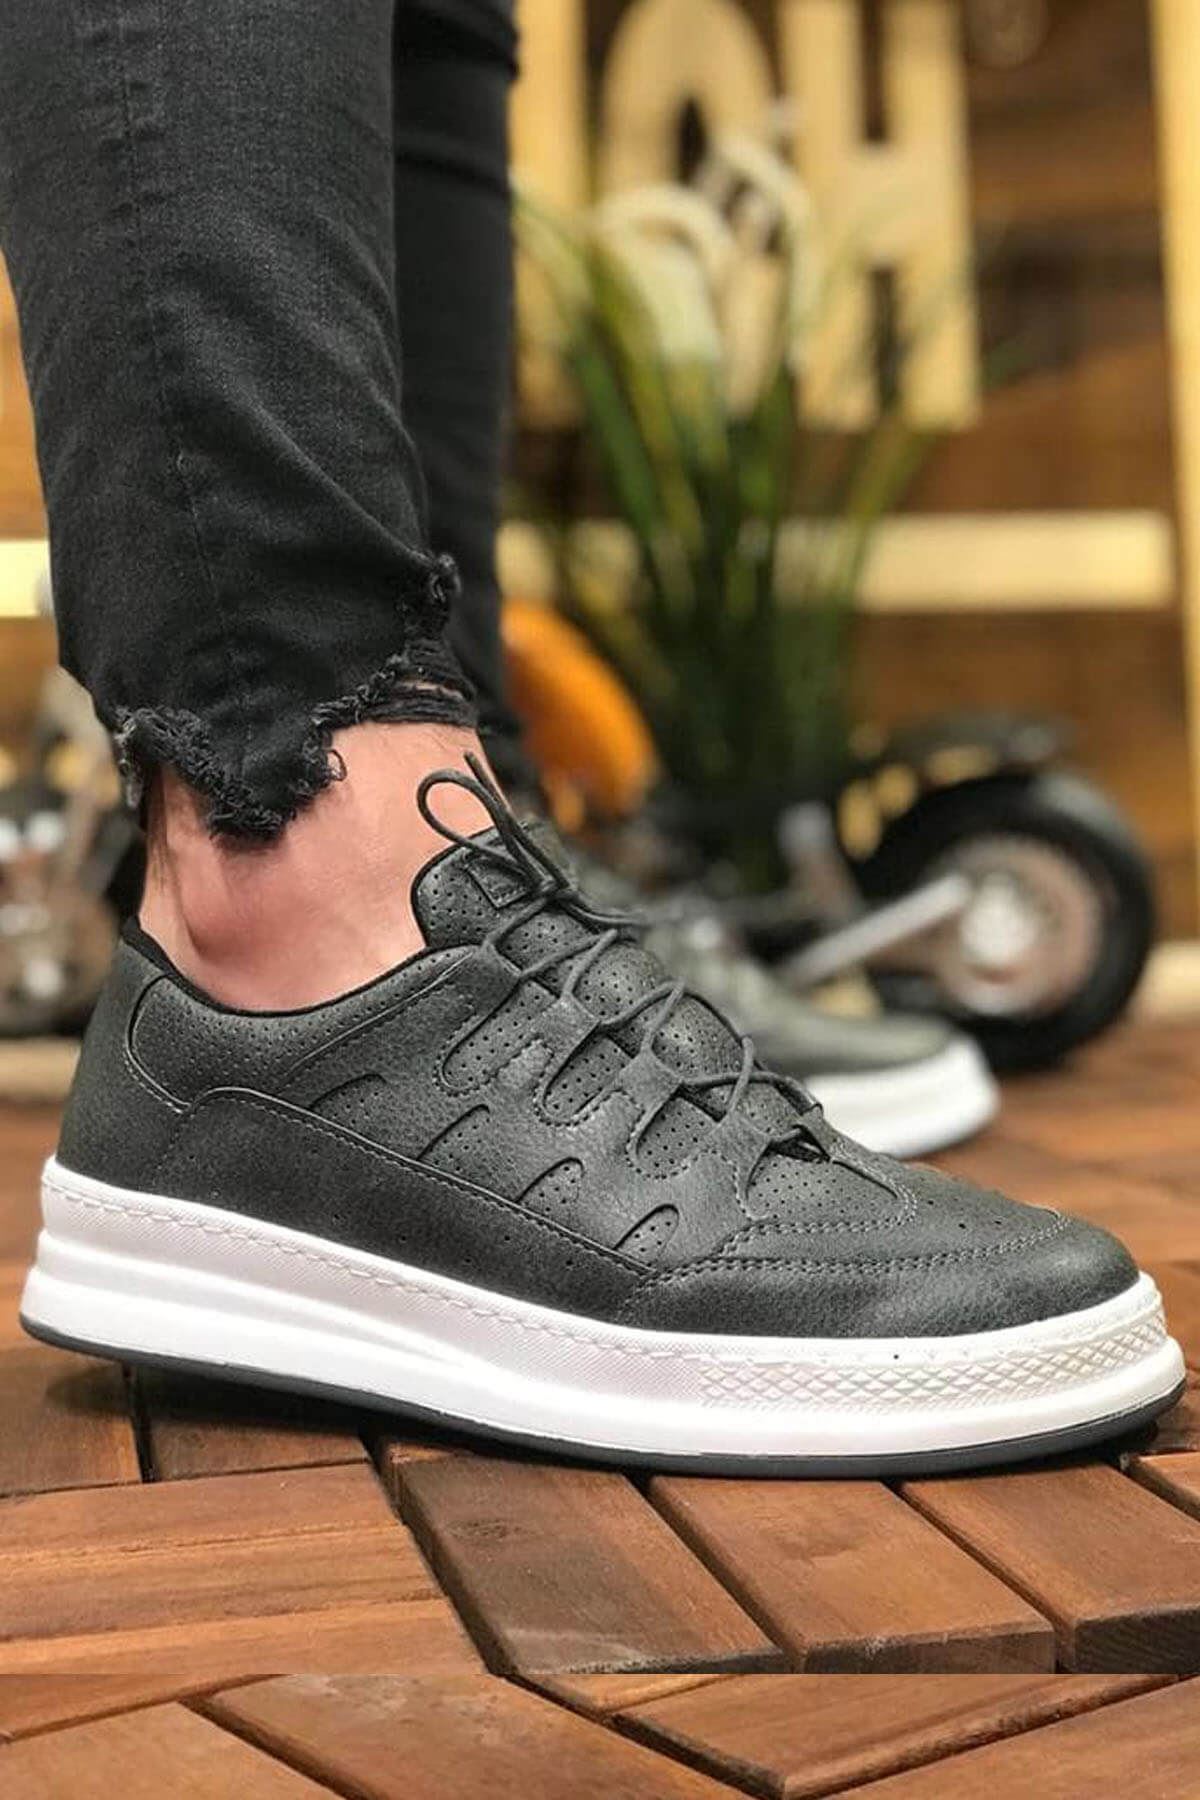 Chekich Men's Casual Shoes Black Color Faux Leather Lace Up Business Fashion Orthopedic Breathable Vulcanized Odorless Light Sport 2021 Brand Wedding Formal Suits Office Sneakers White Sole Walking Footwear CH040 V5